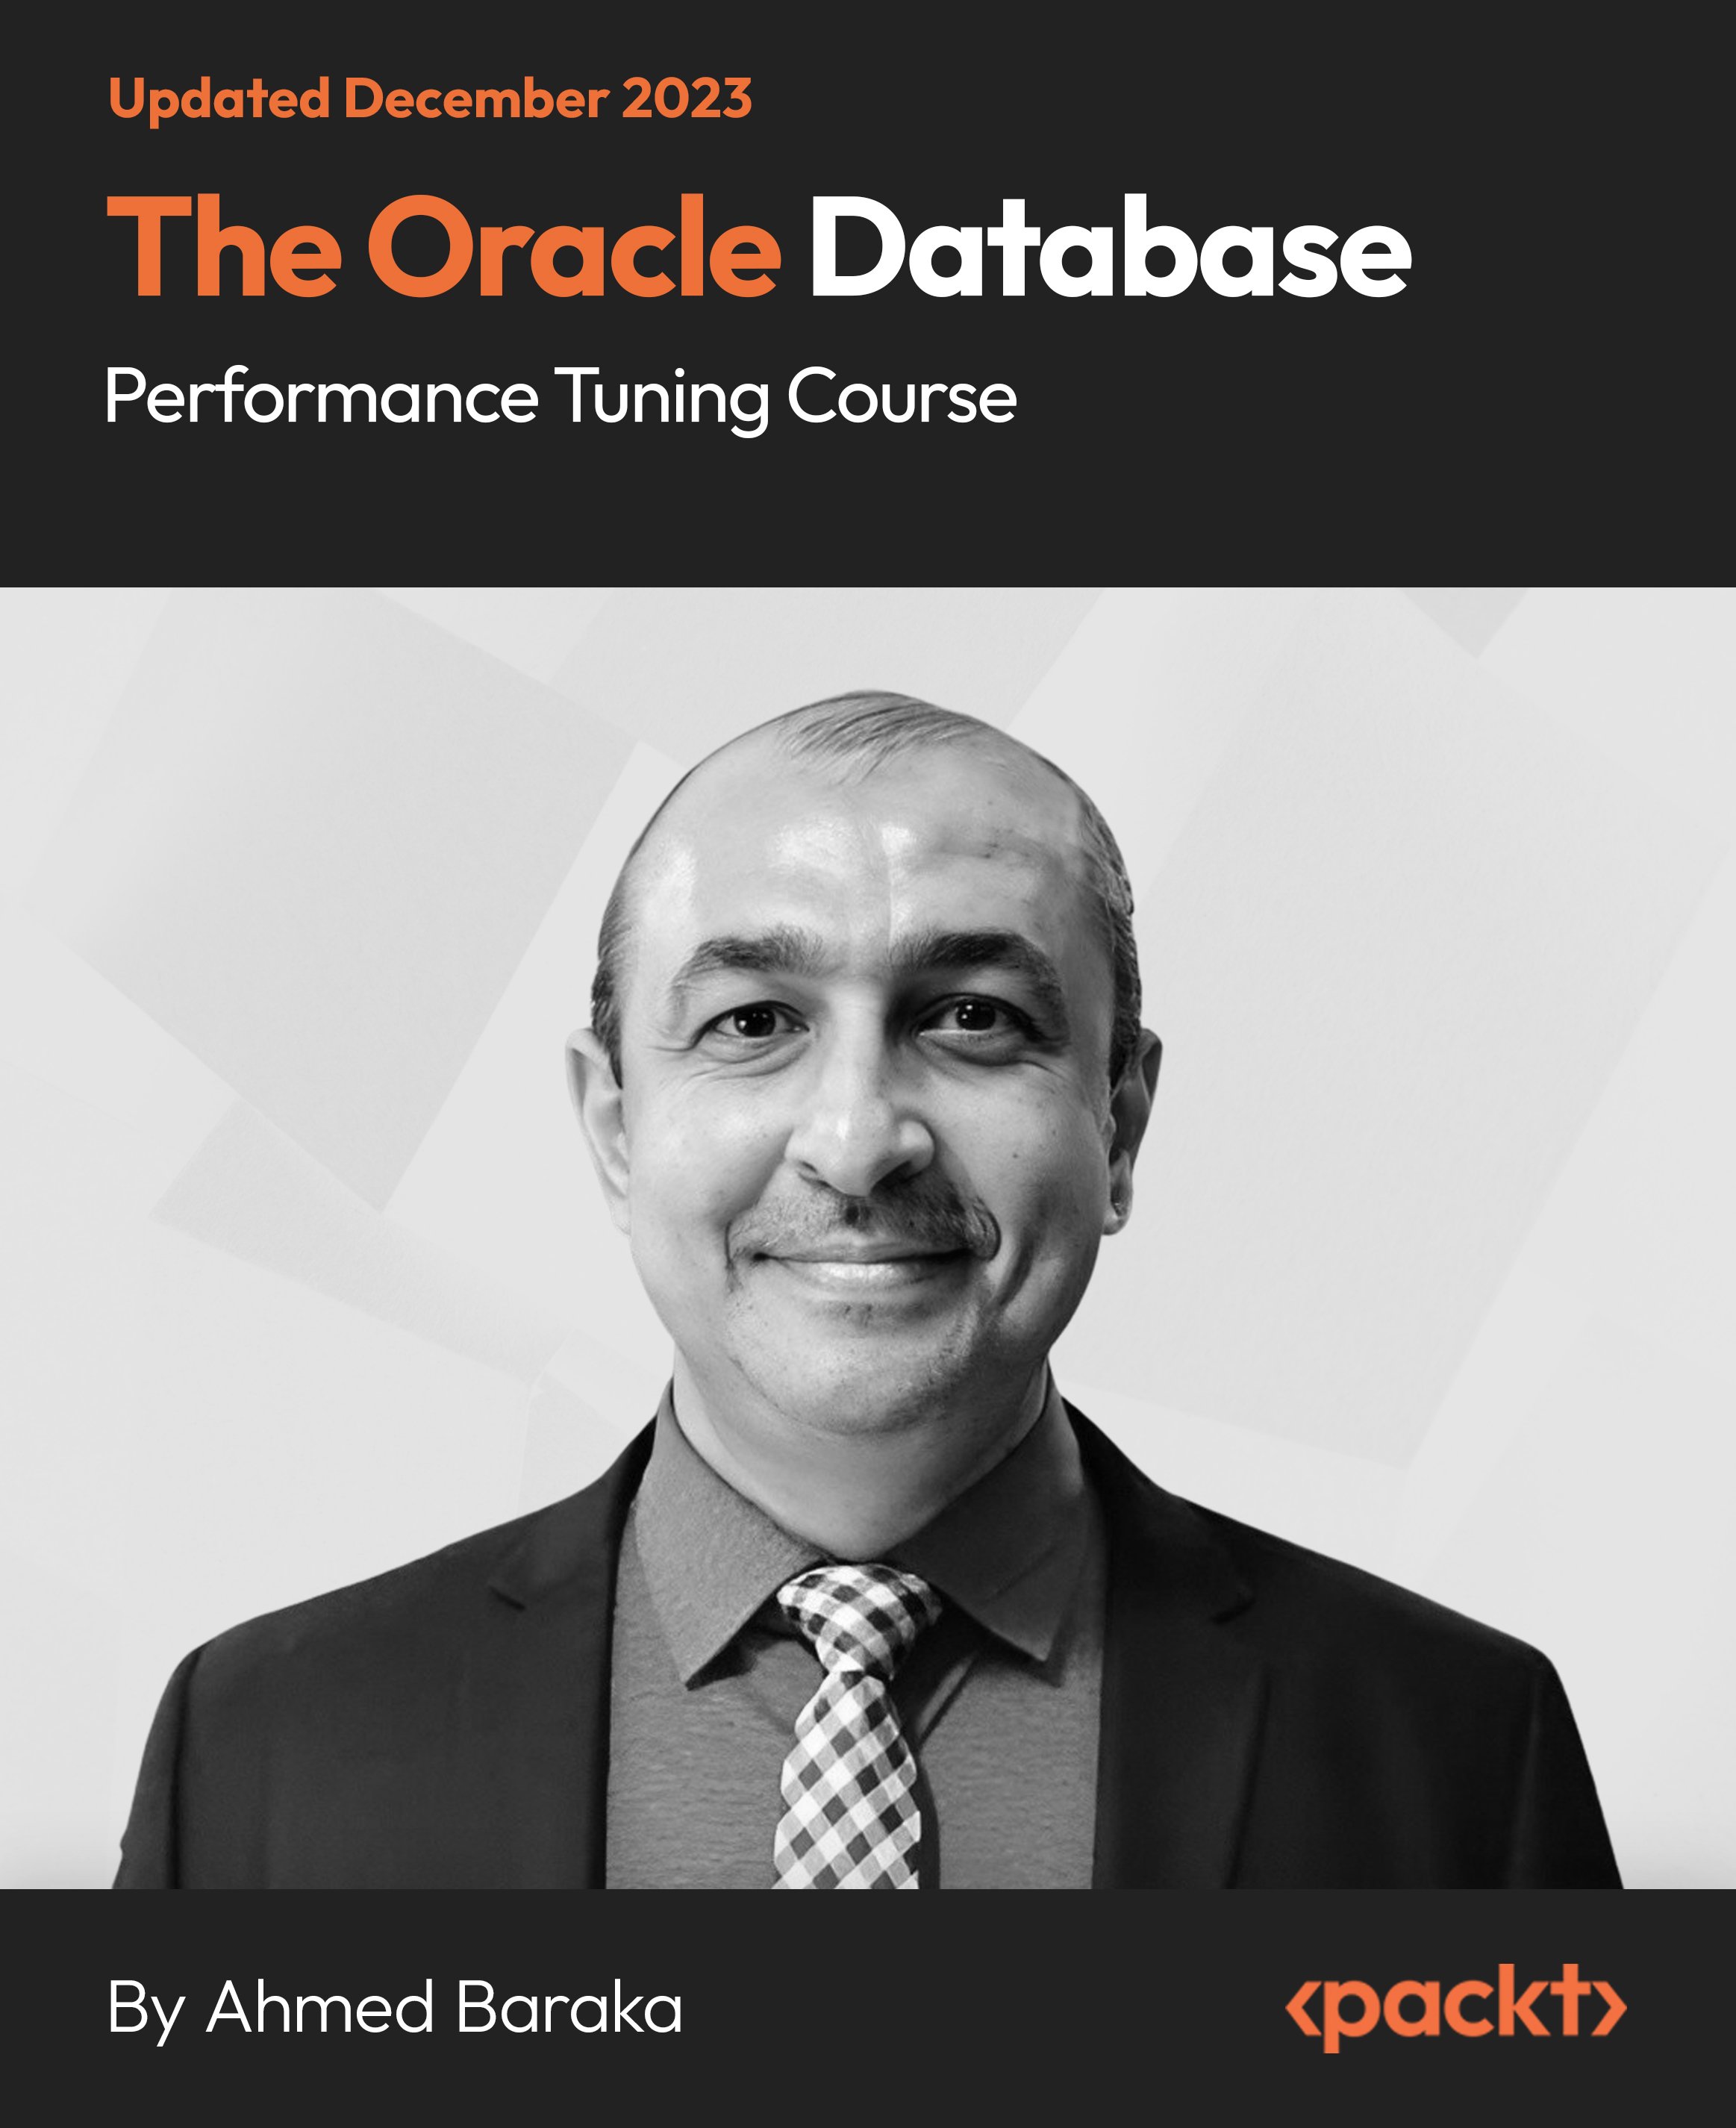 The Oracle Database Performance Tuning Course